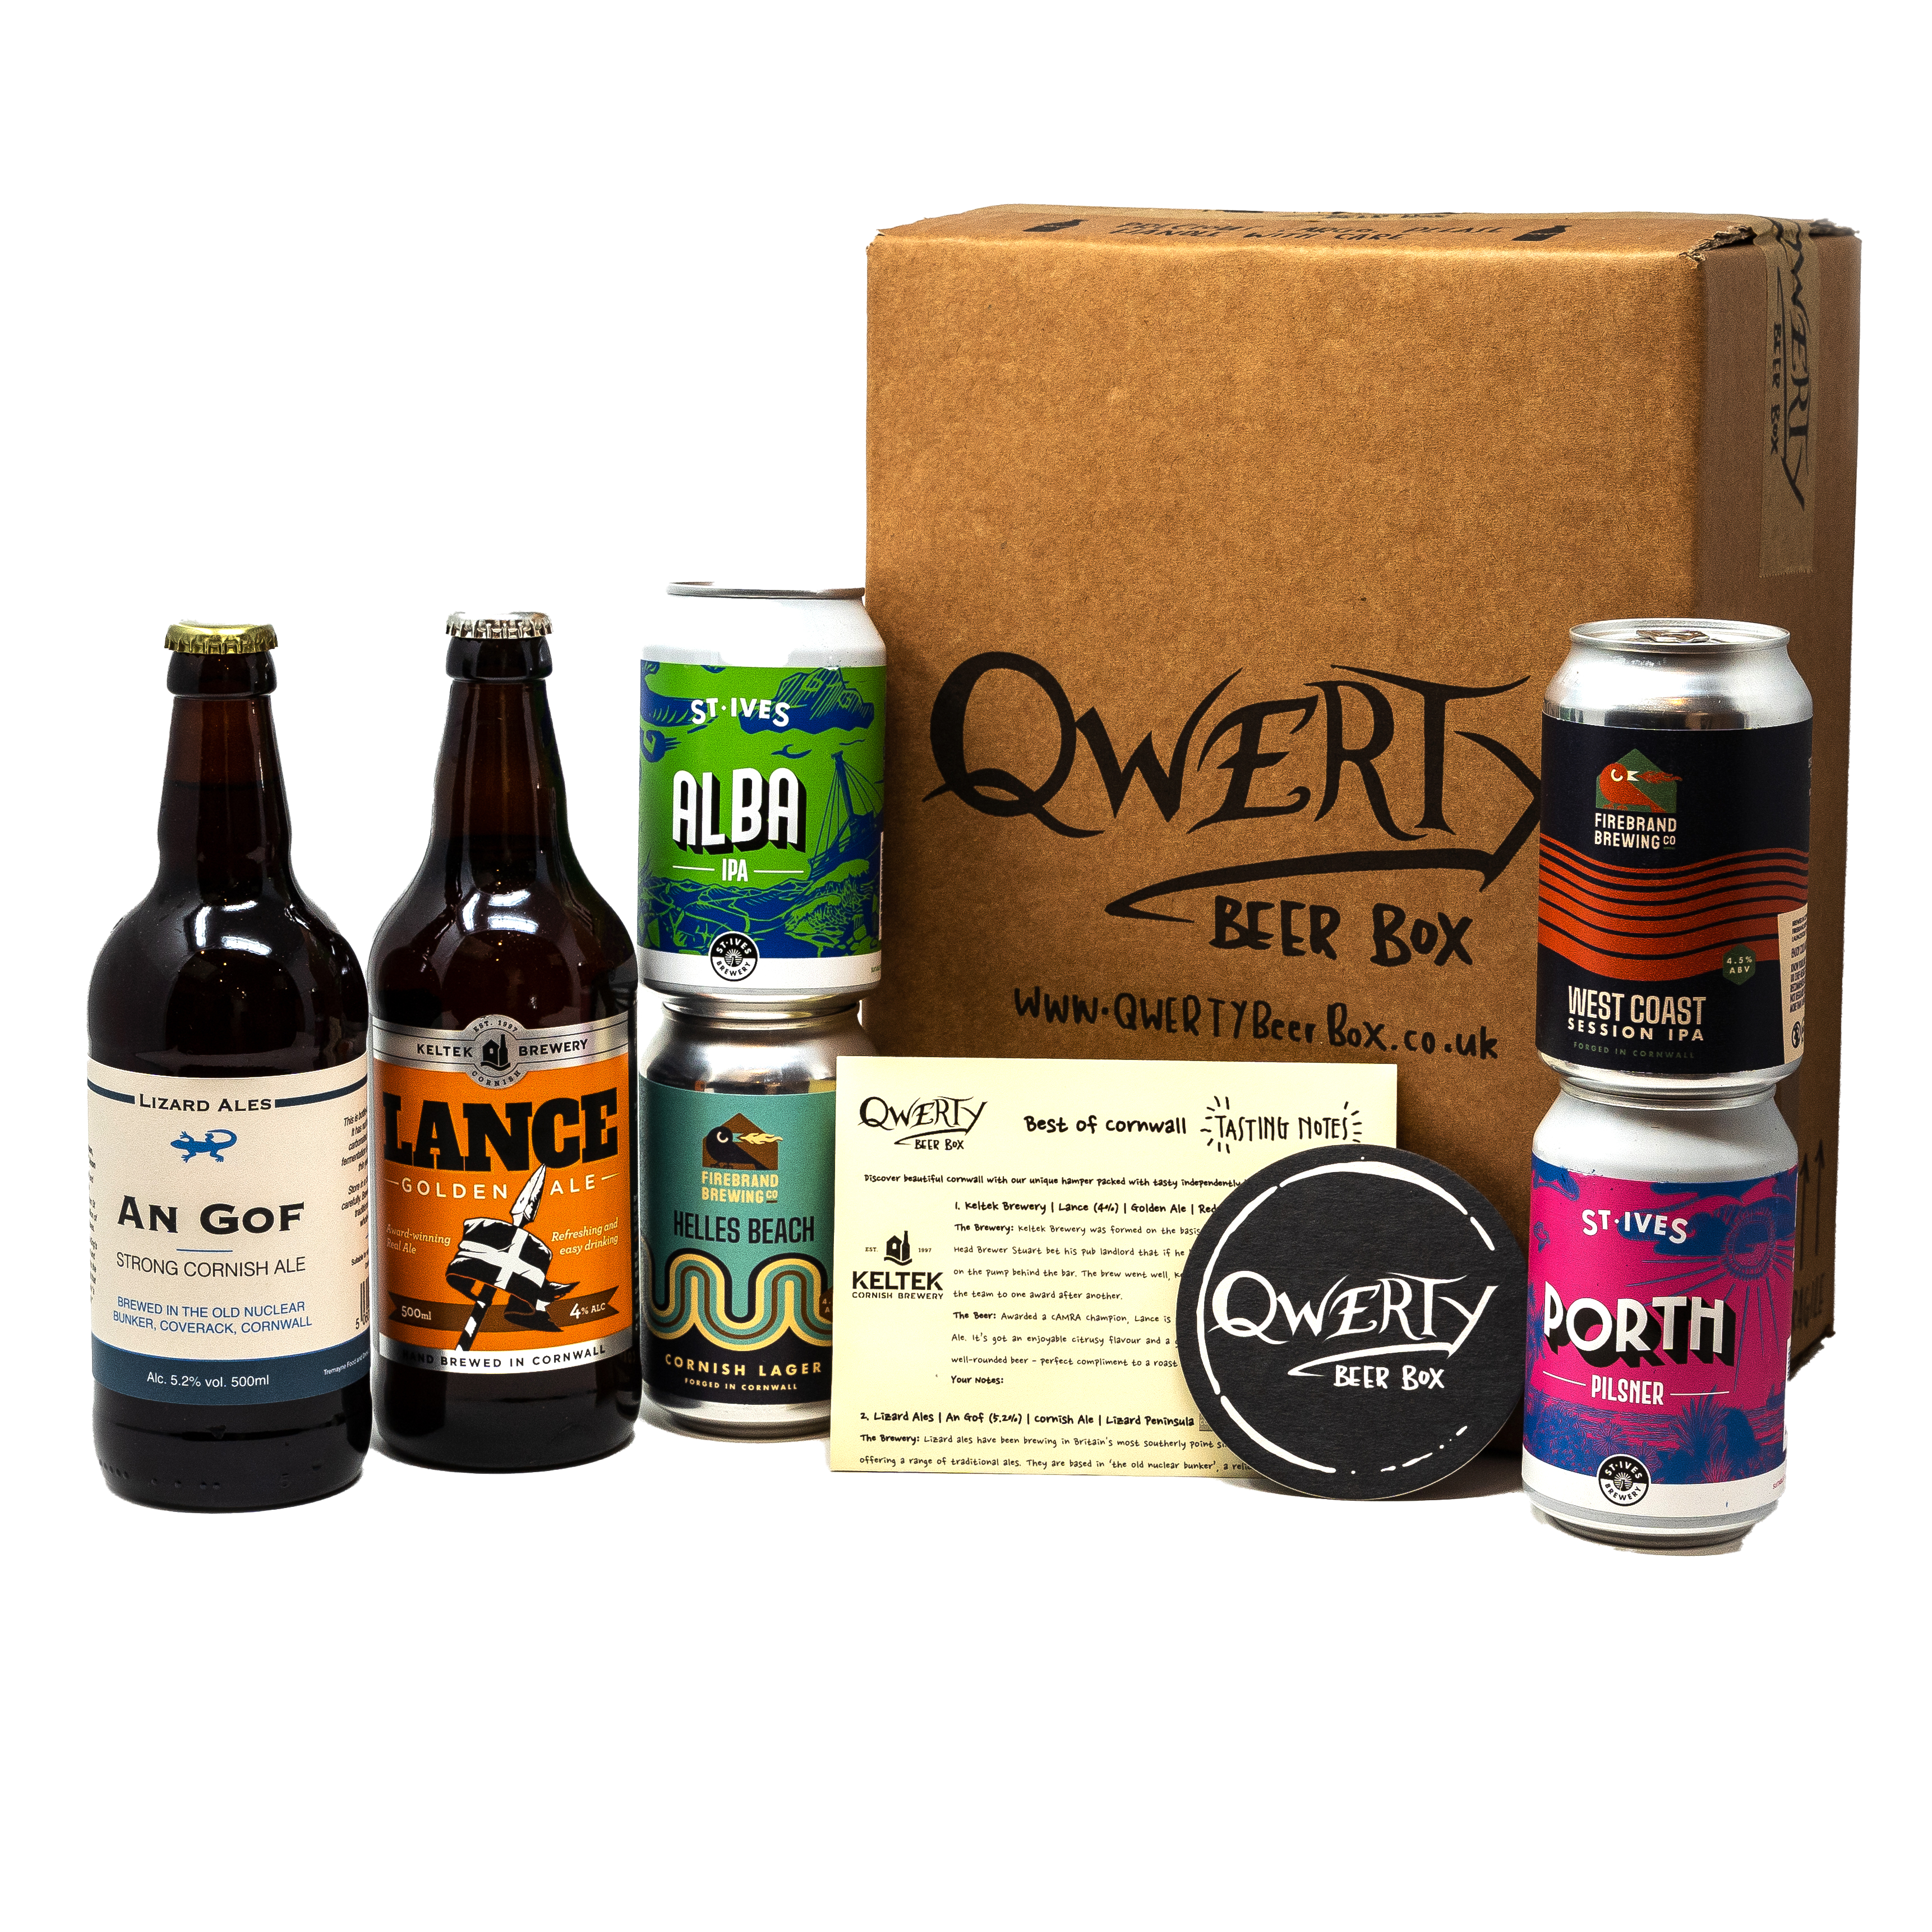 Life is too Short to Drink Bad (non-Celteg) Wine' ...Buy a Welsh Beer Gift  instead! - Celtic Country Wines